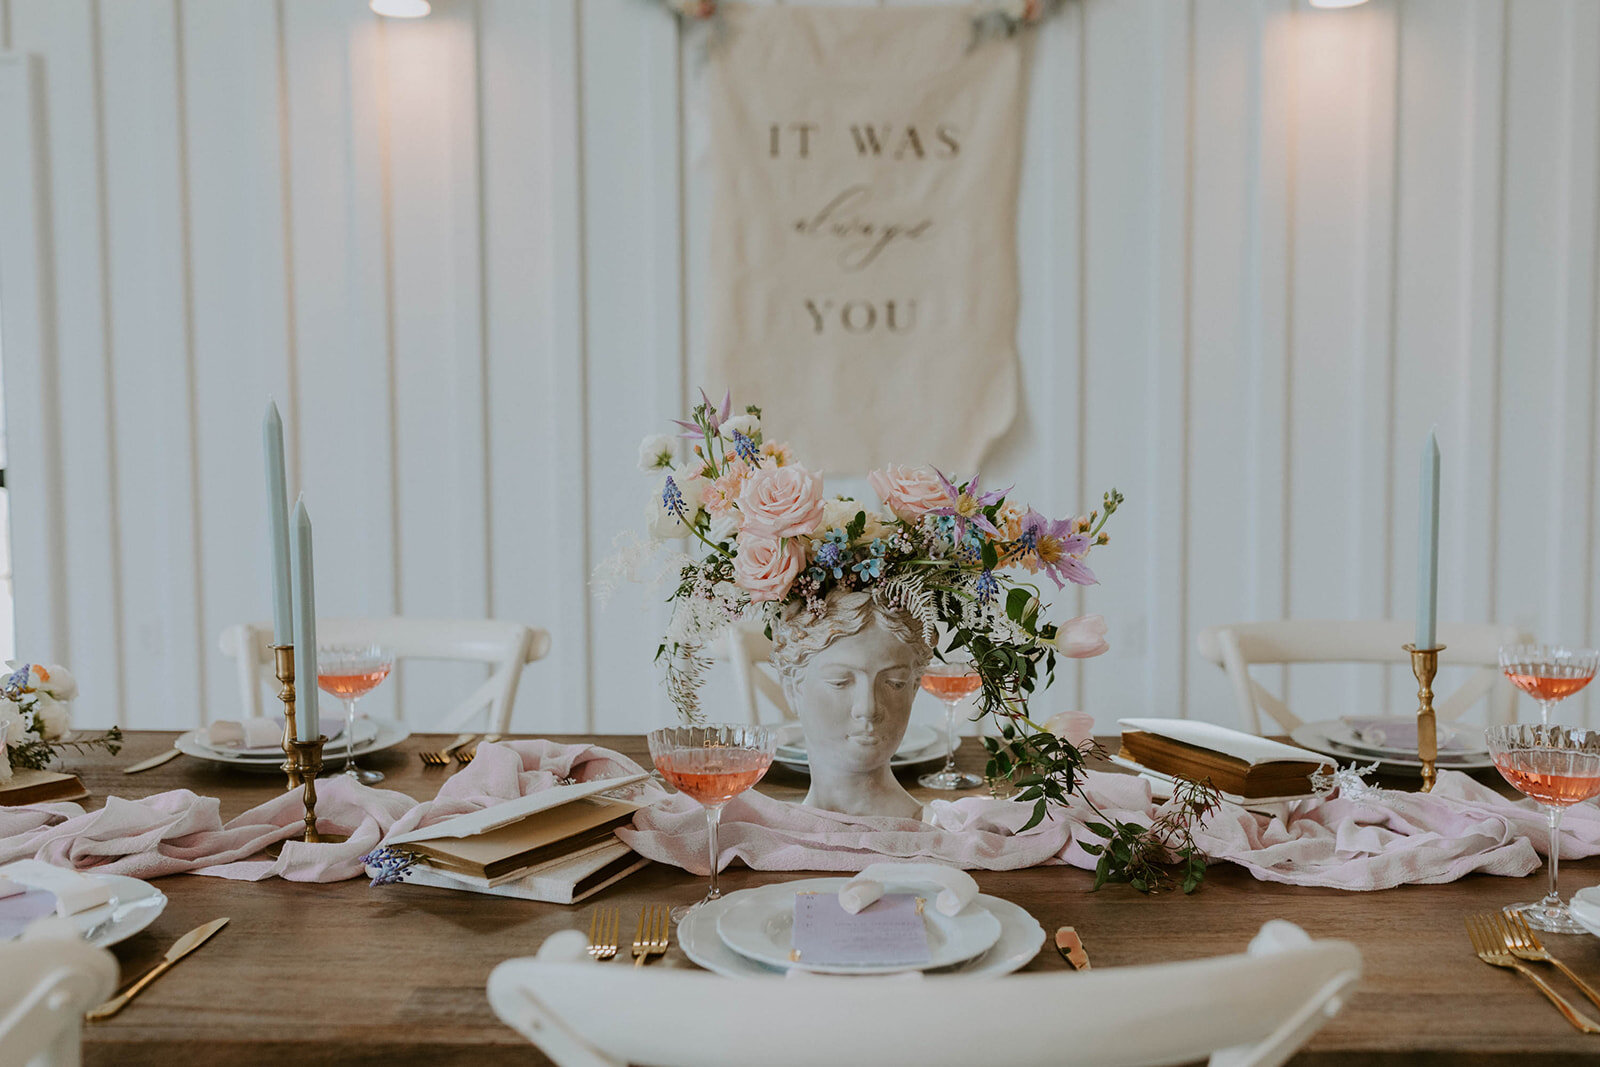 Romantic wedding styled shoot. Elegant table lay with colorful florals.